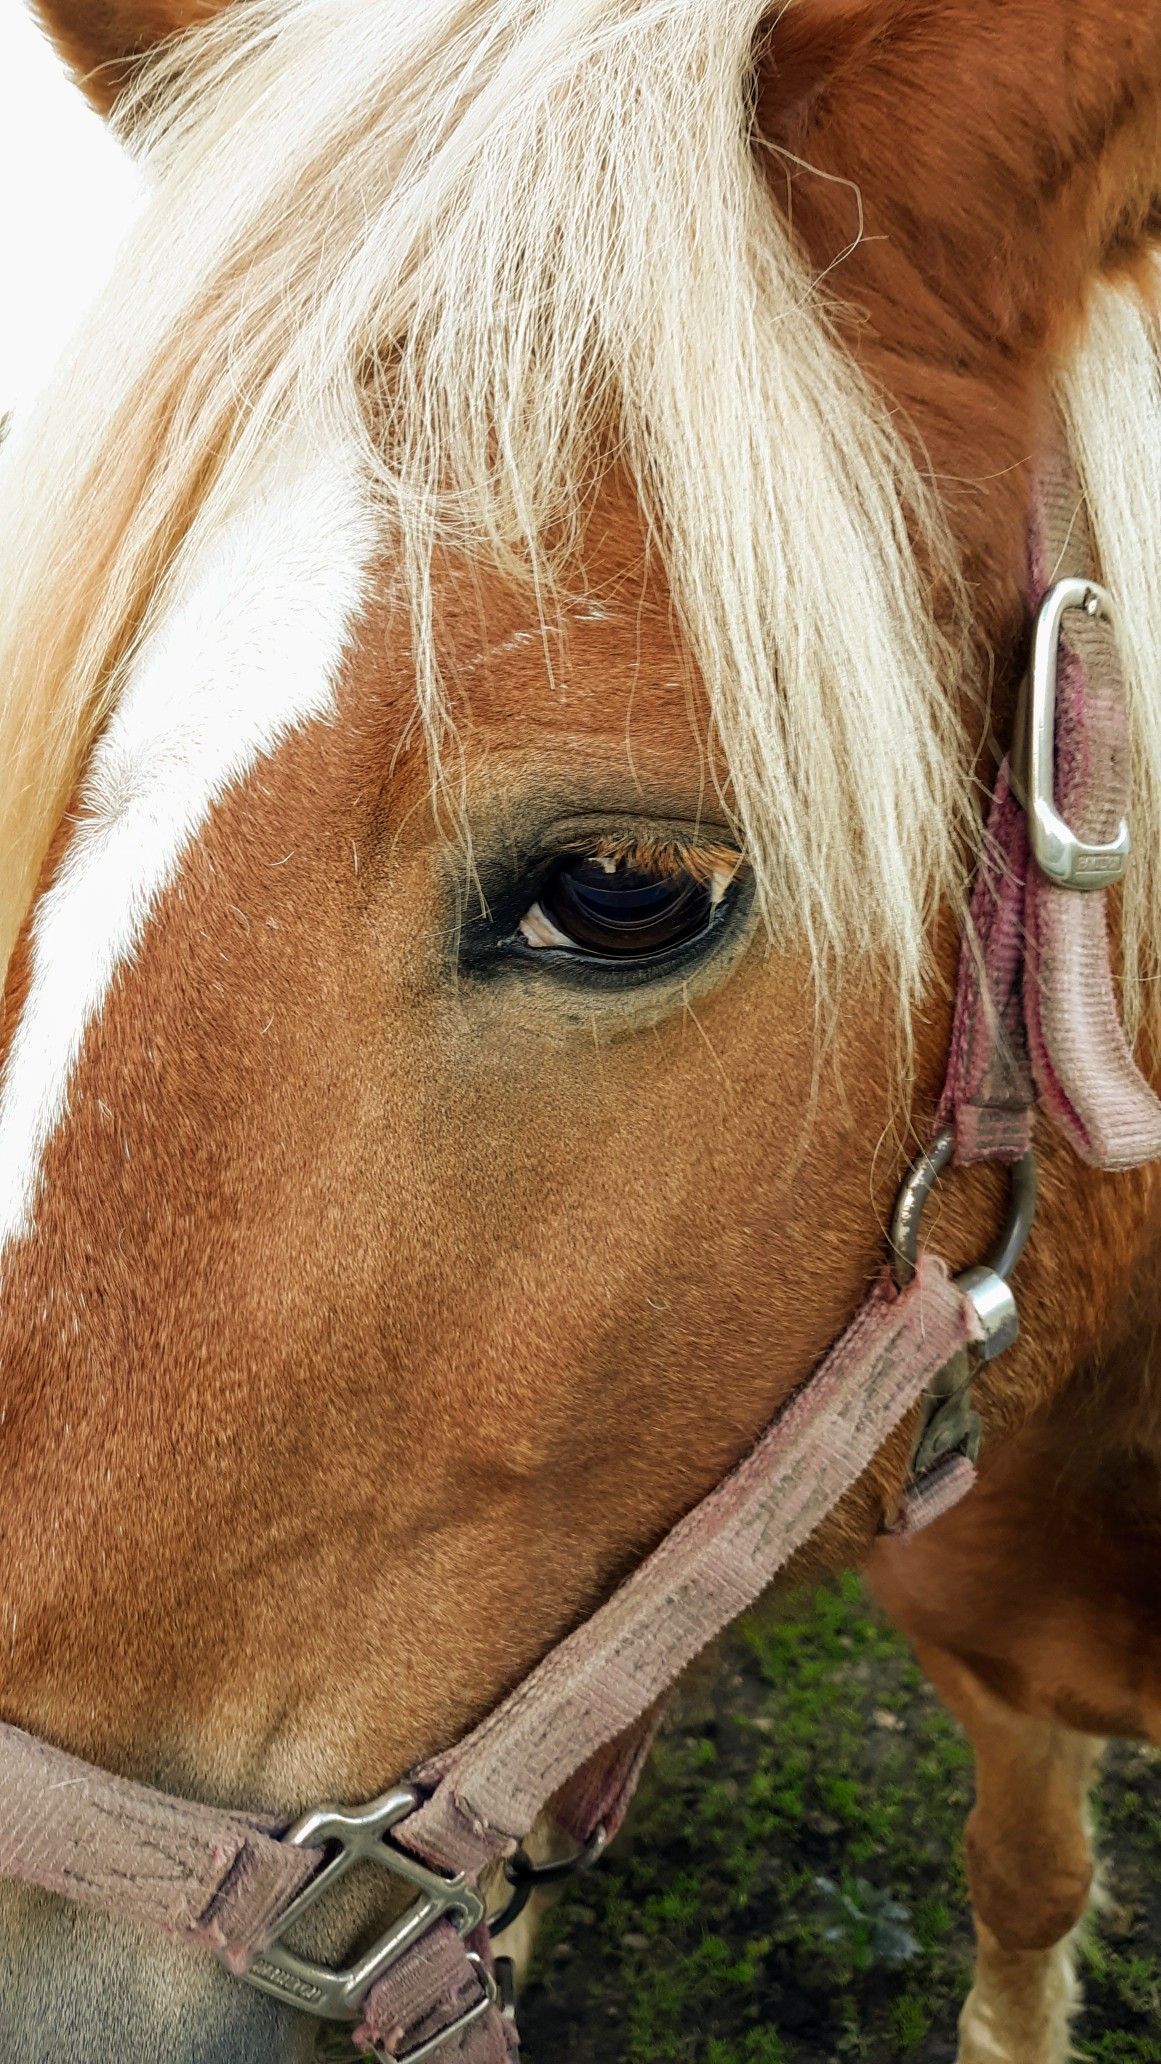 Horse iPhone wallpaper. Horse face, Horses, Phone background